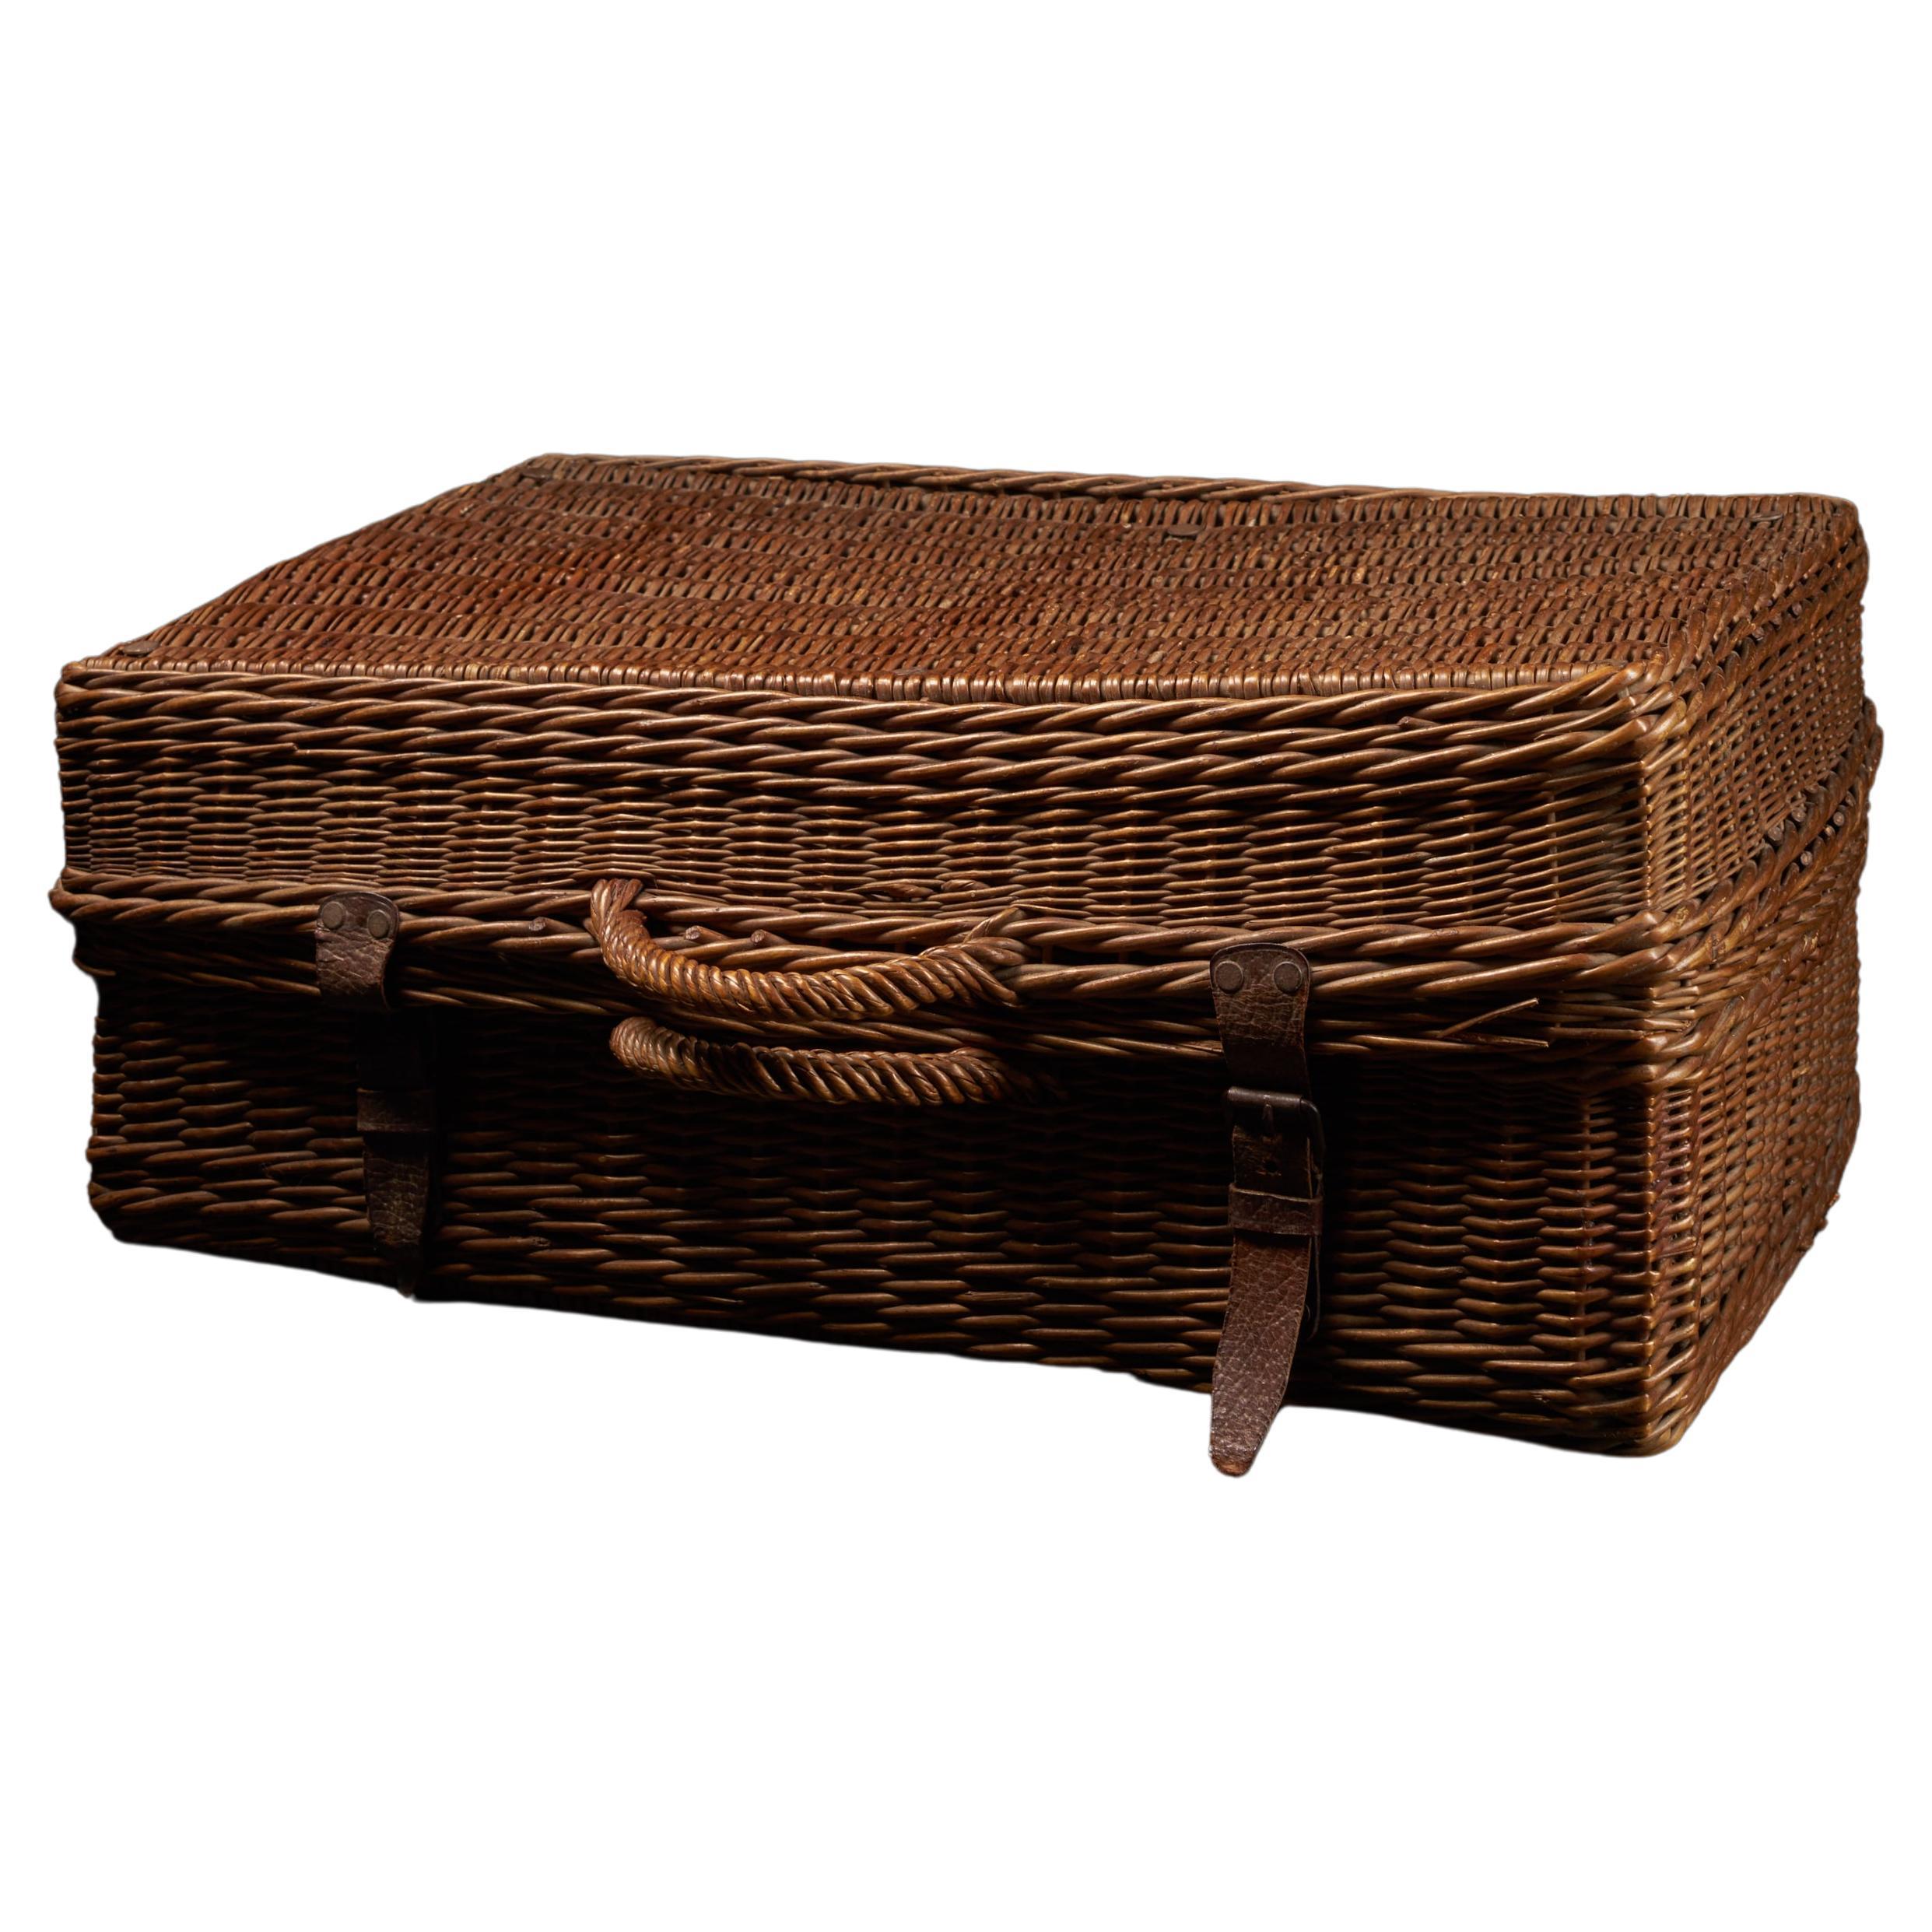 This French picnic basket for four was made to last with quality construction and stylish
details. Beautifully handcrafted using full reed willow and genuine leather
straps, the basket includes ceramic plates, ceramic drinking cups, and